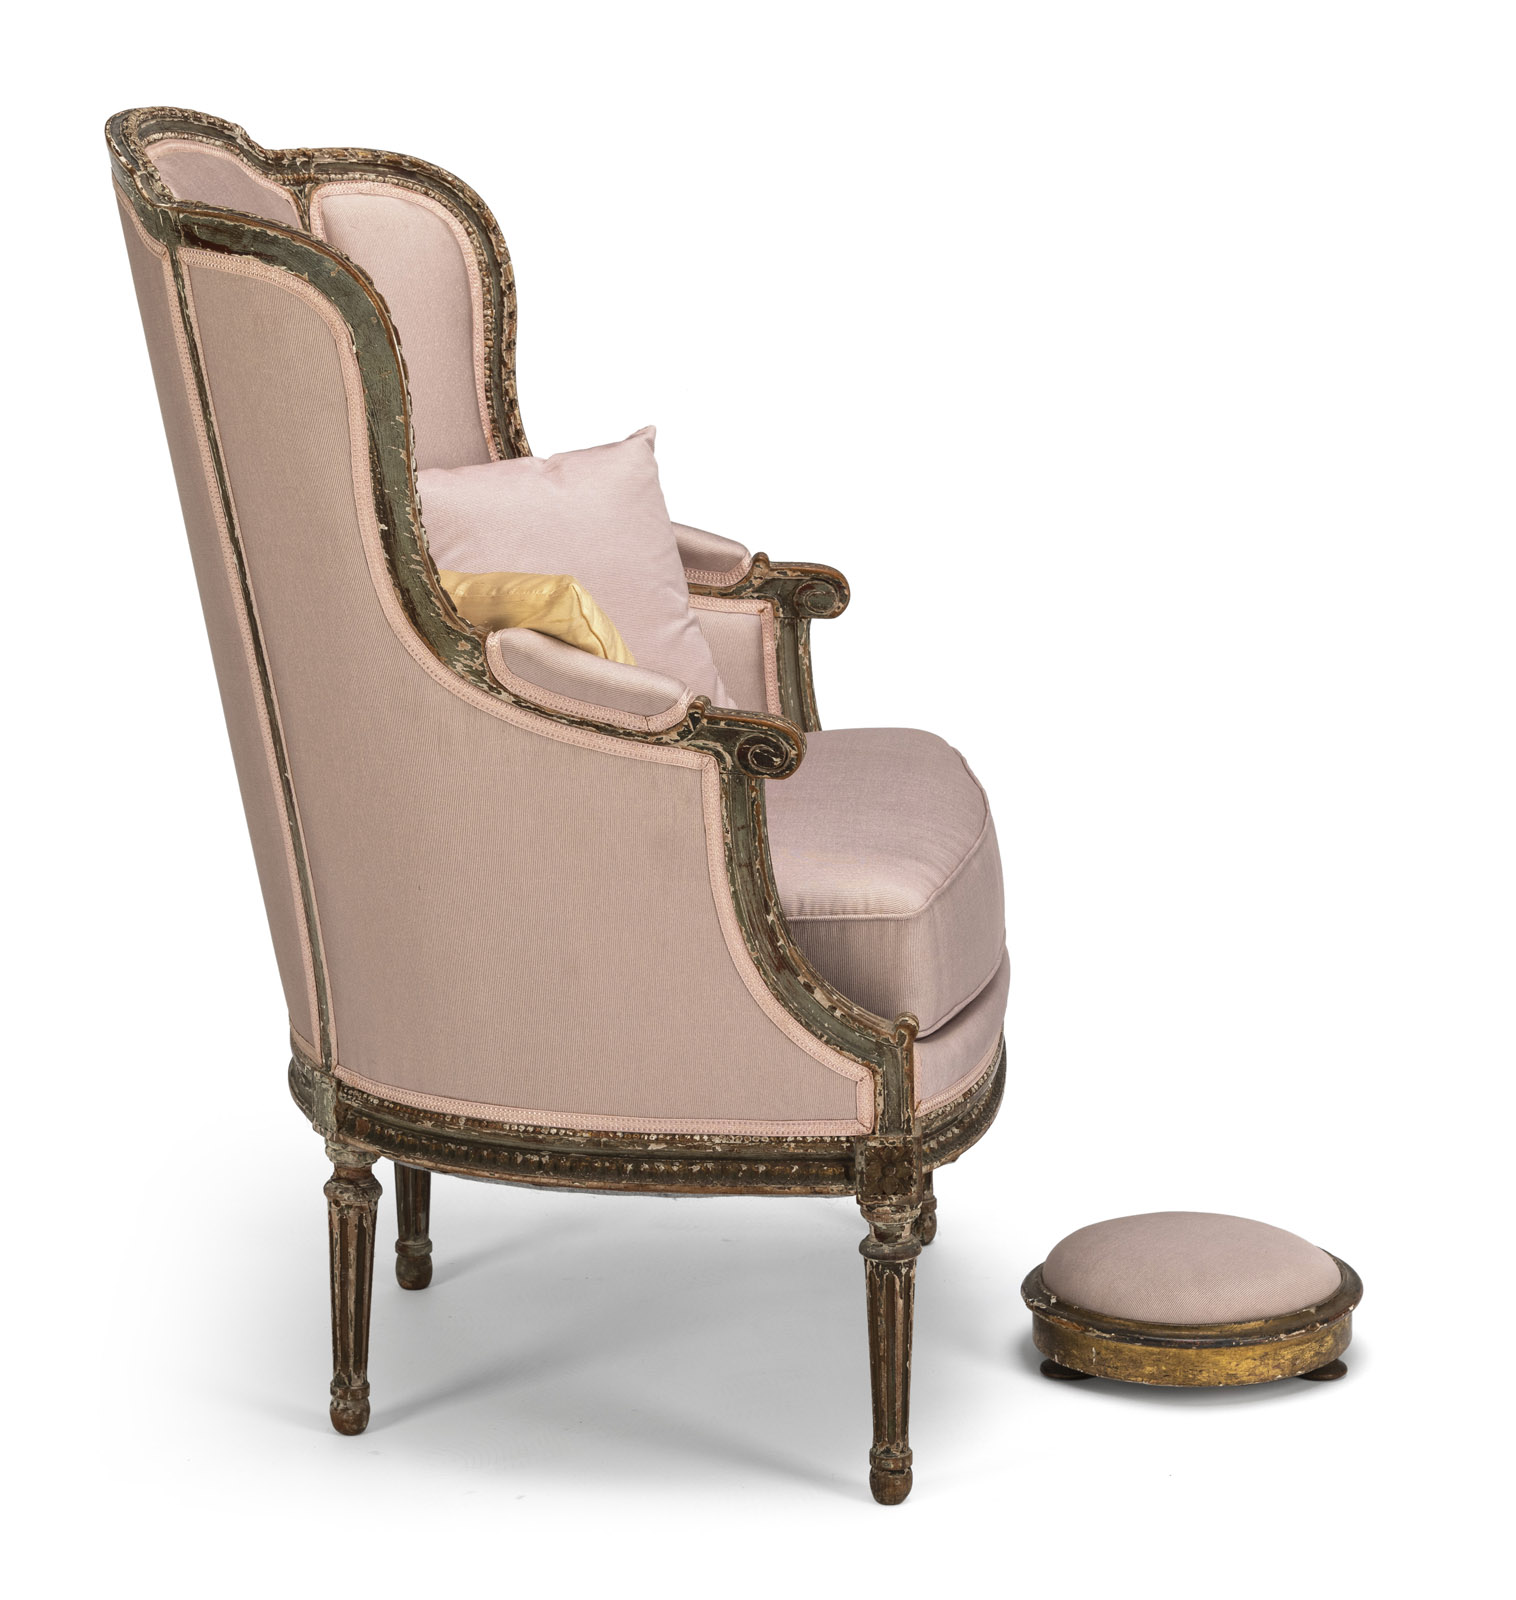 A LOUIS XVI STYLE POLYCHROME AND PARCEL- GILT PAINTED FAUTEUIL - Image 3 of 5